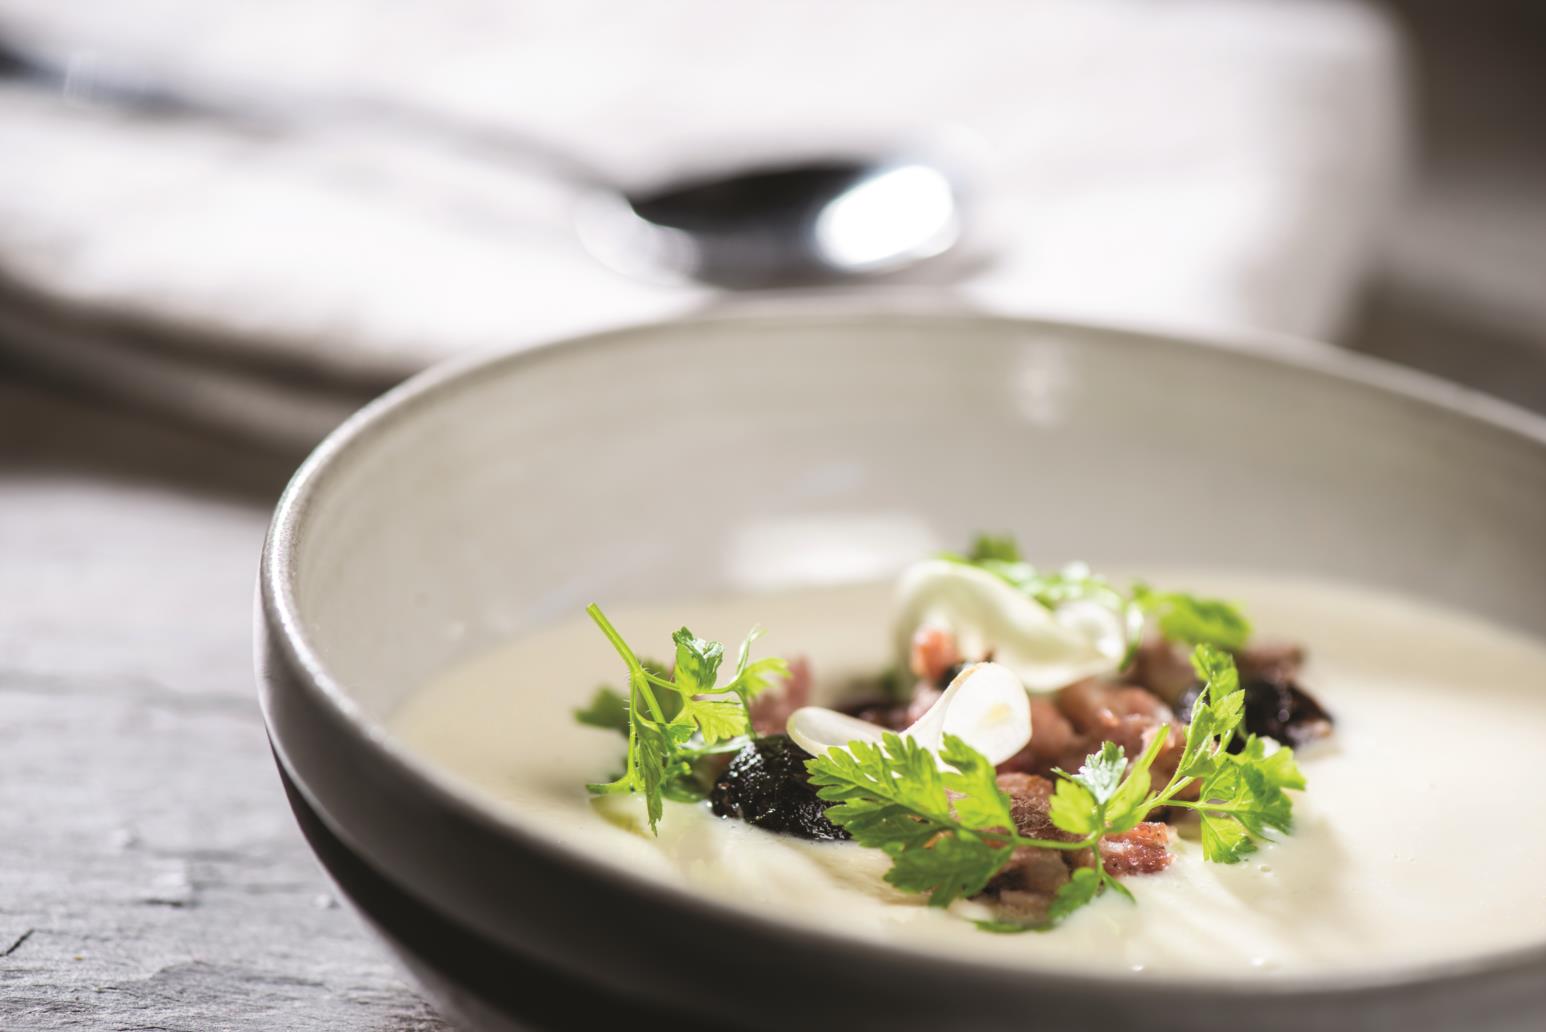 Open Acres' homestyle, chef-inspired soups can be found in the